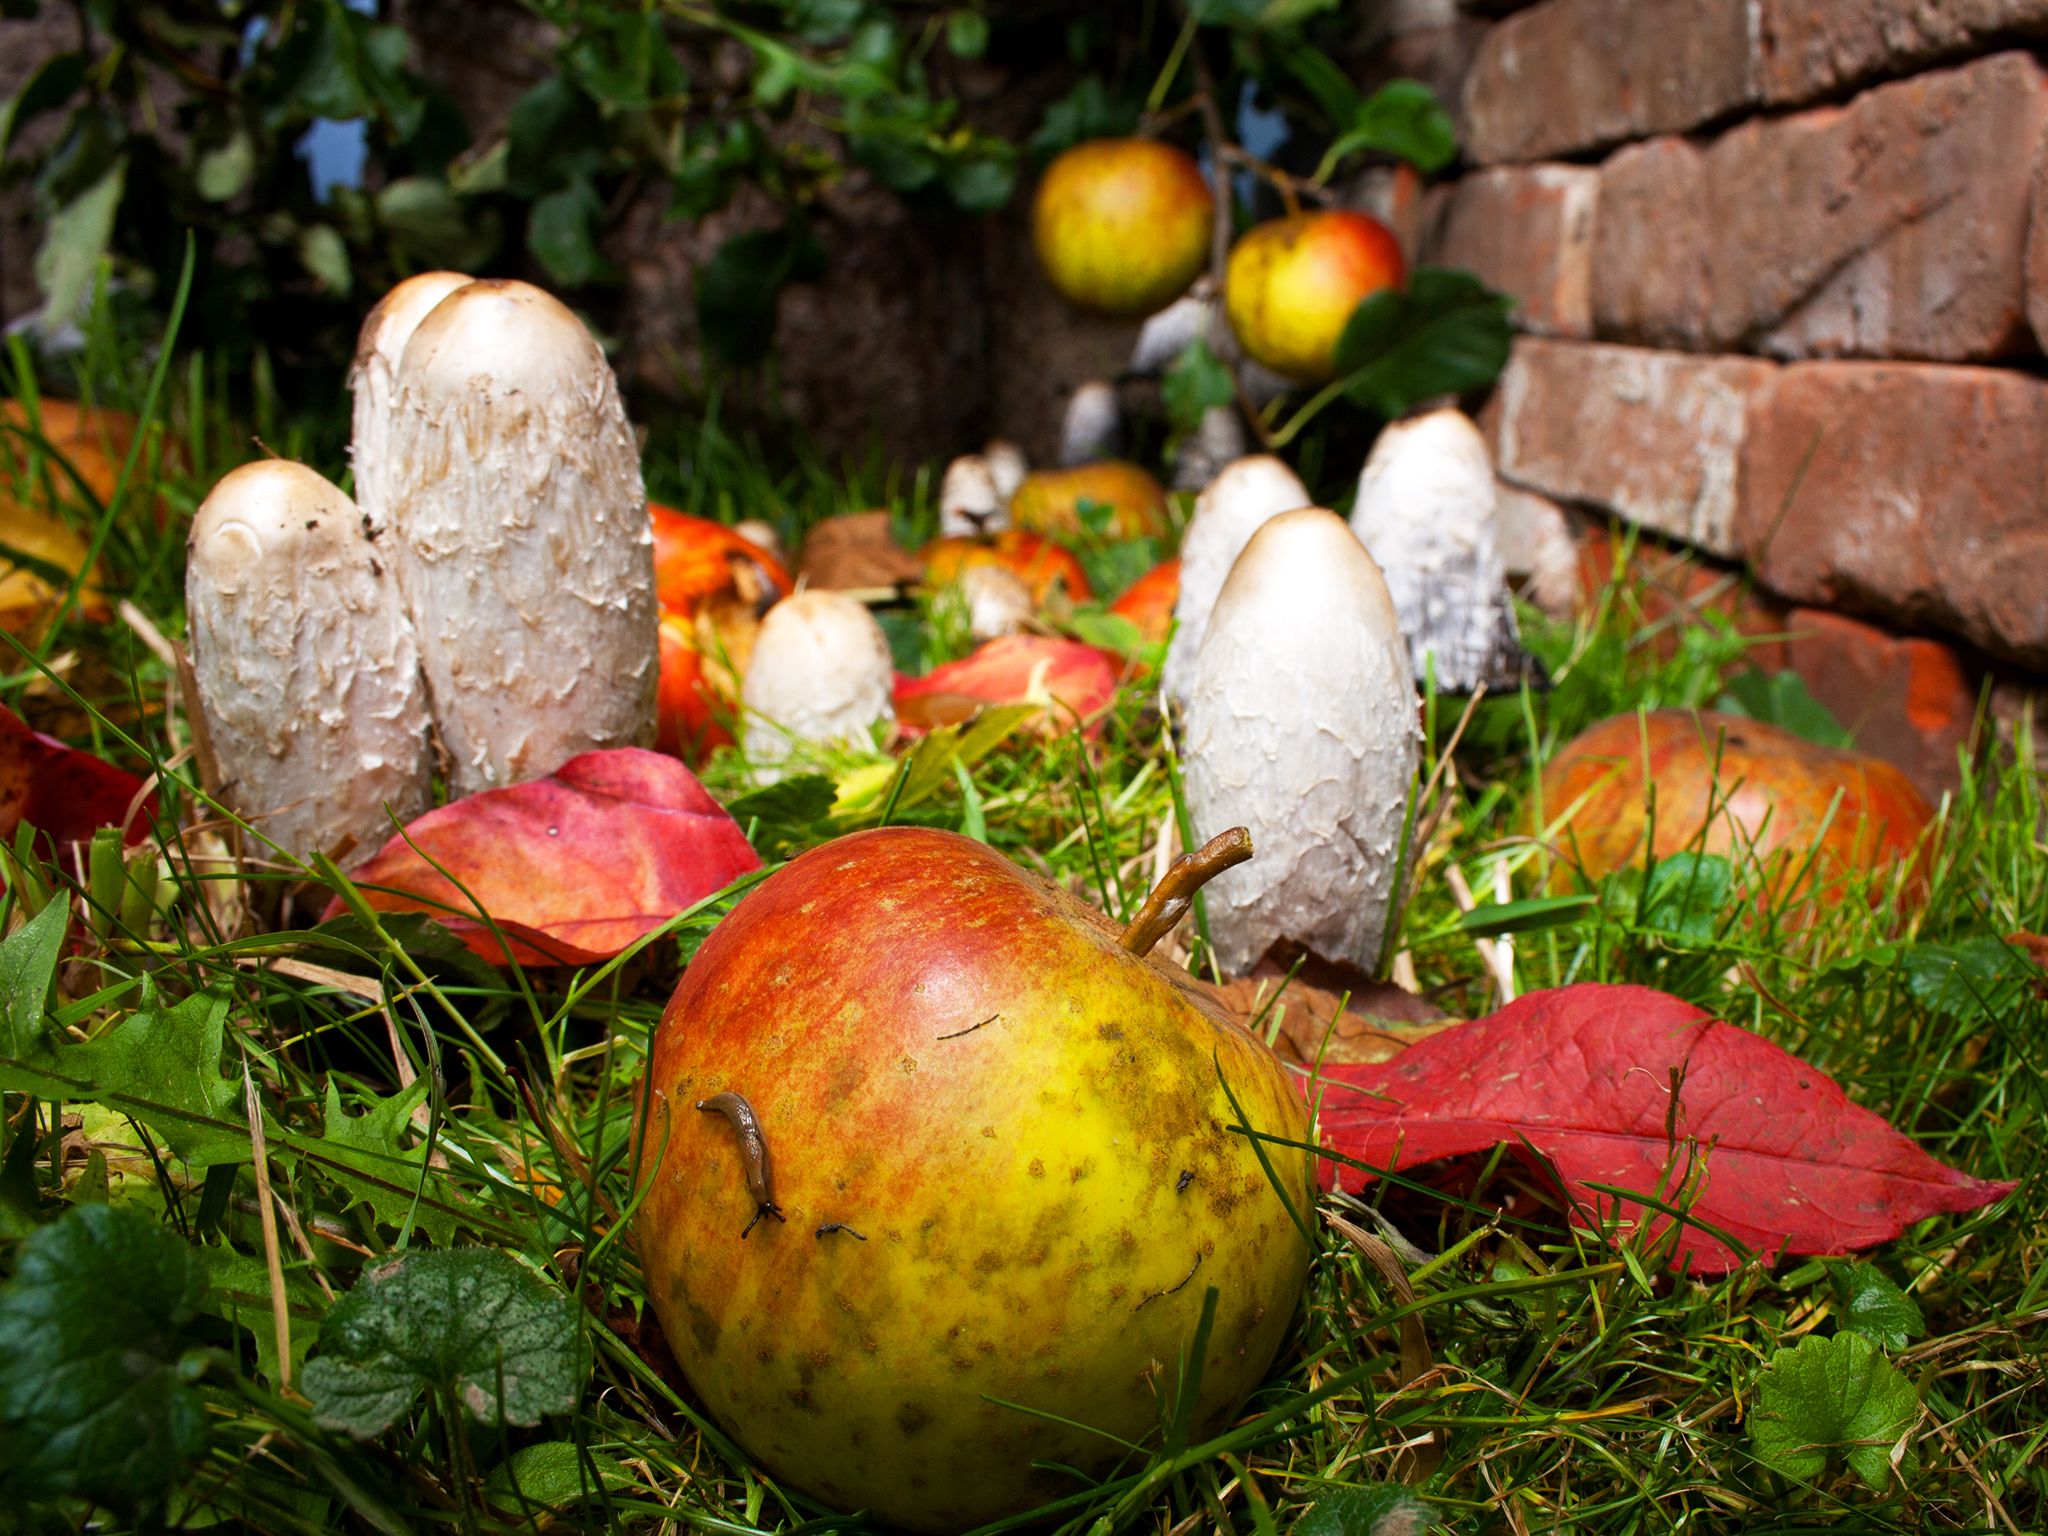 Mushrooms growing in the garden. This image is from Secret Garden. [Photo of the day - January 2015]